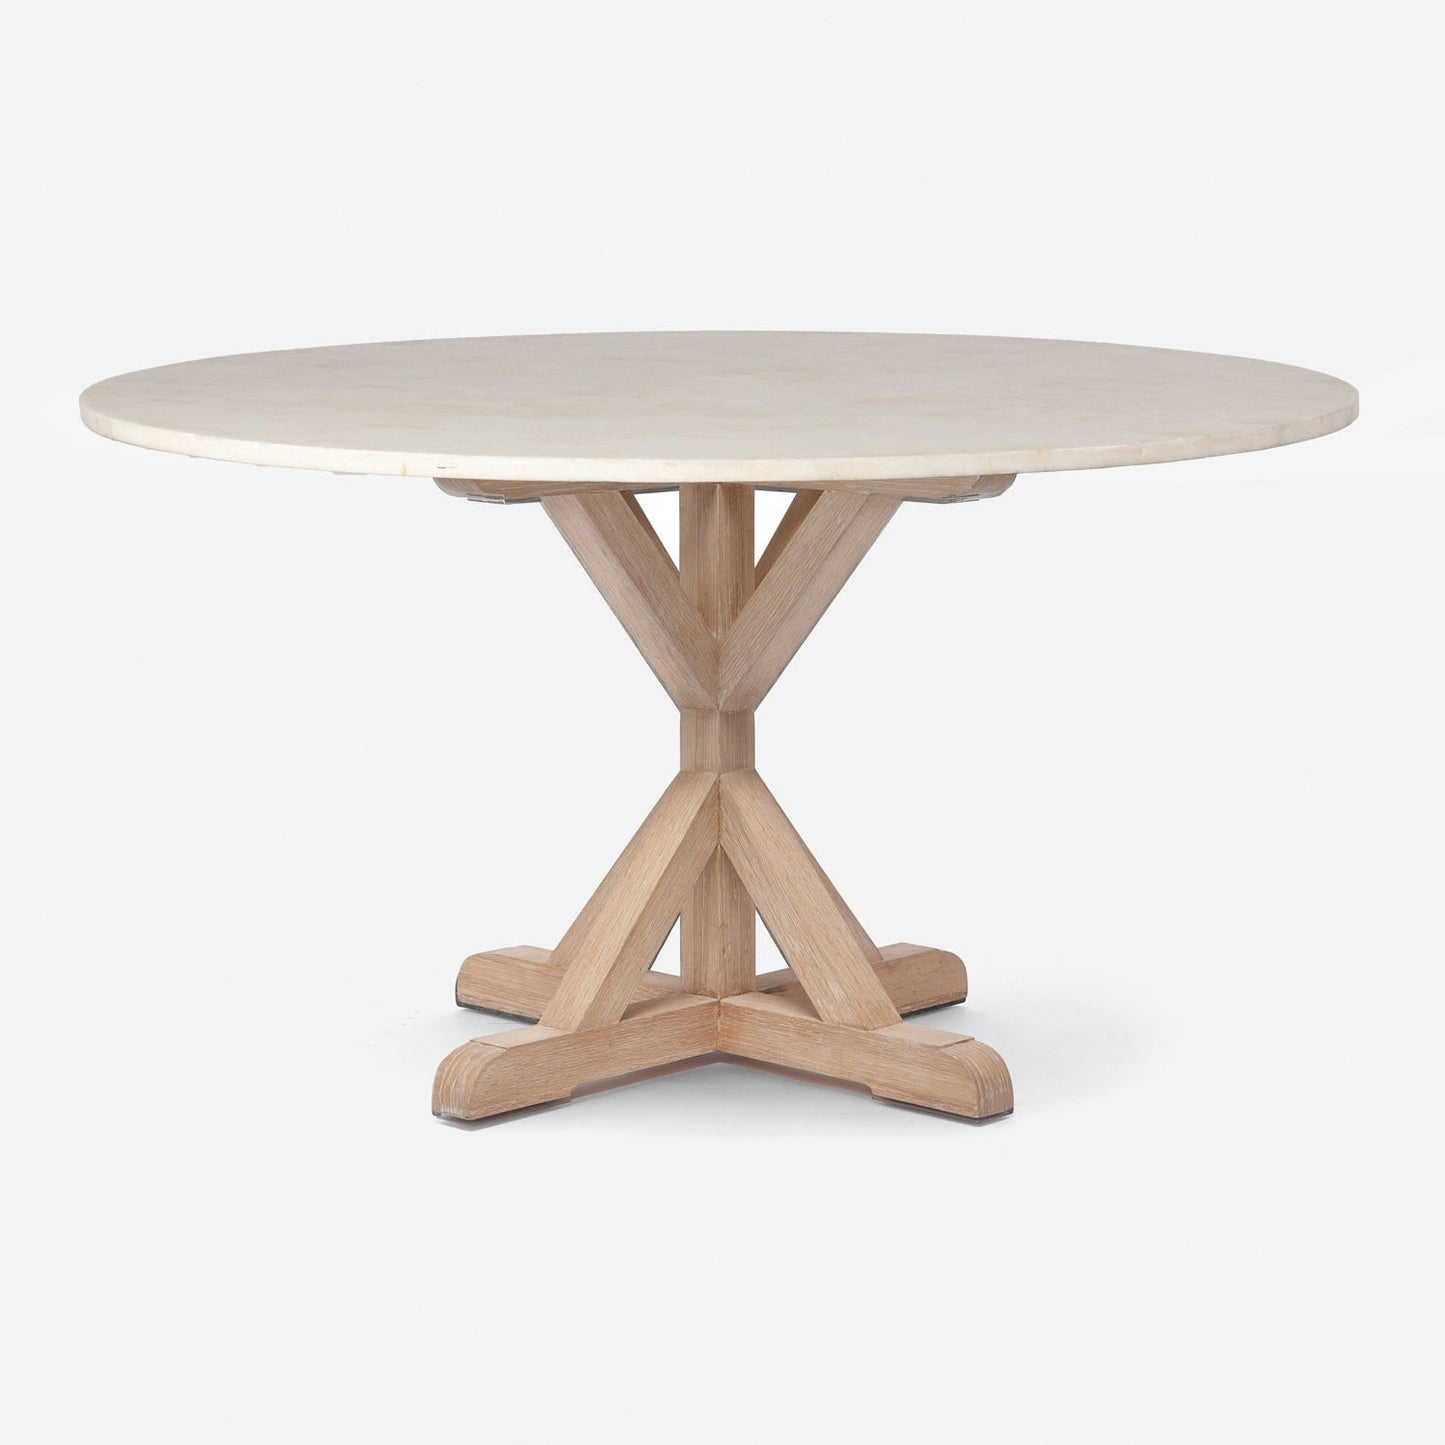 Made Goods Dane 72" x 30" White Cerused Oak Dinning Table With Round Ice Crystal Stone Table Top